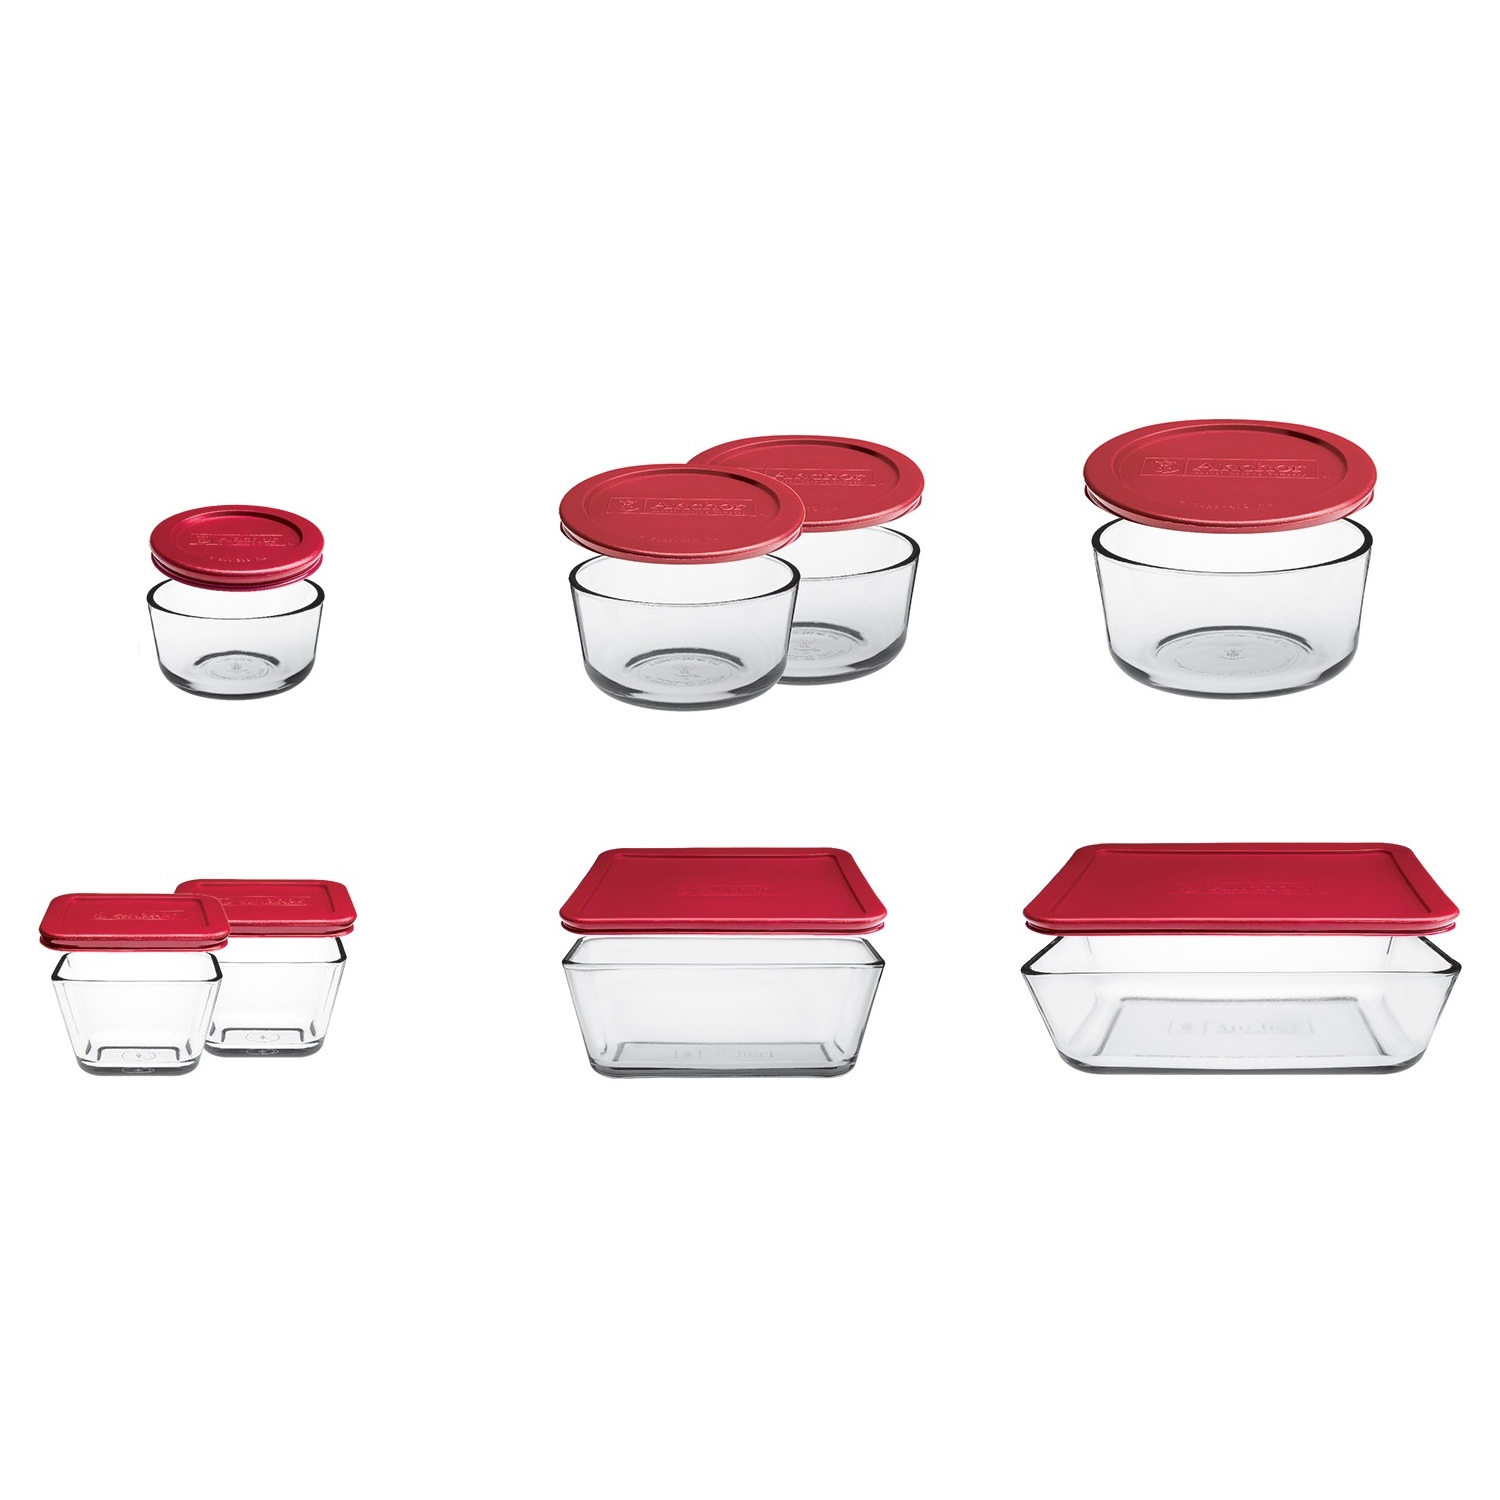 Anchor Hocking 16-Piece Kitchen Food Storage Set with Red Lids - image 2 of 2